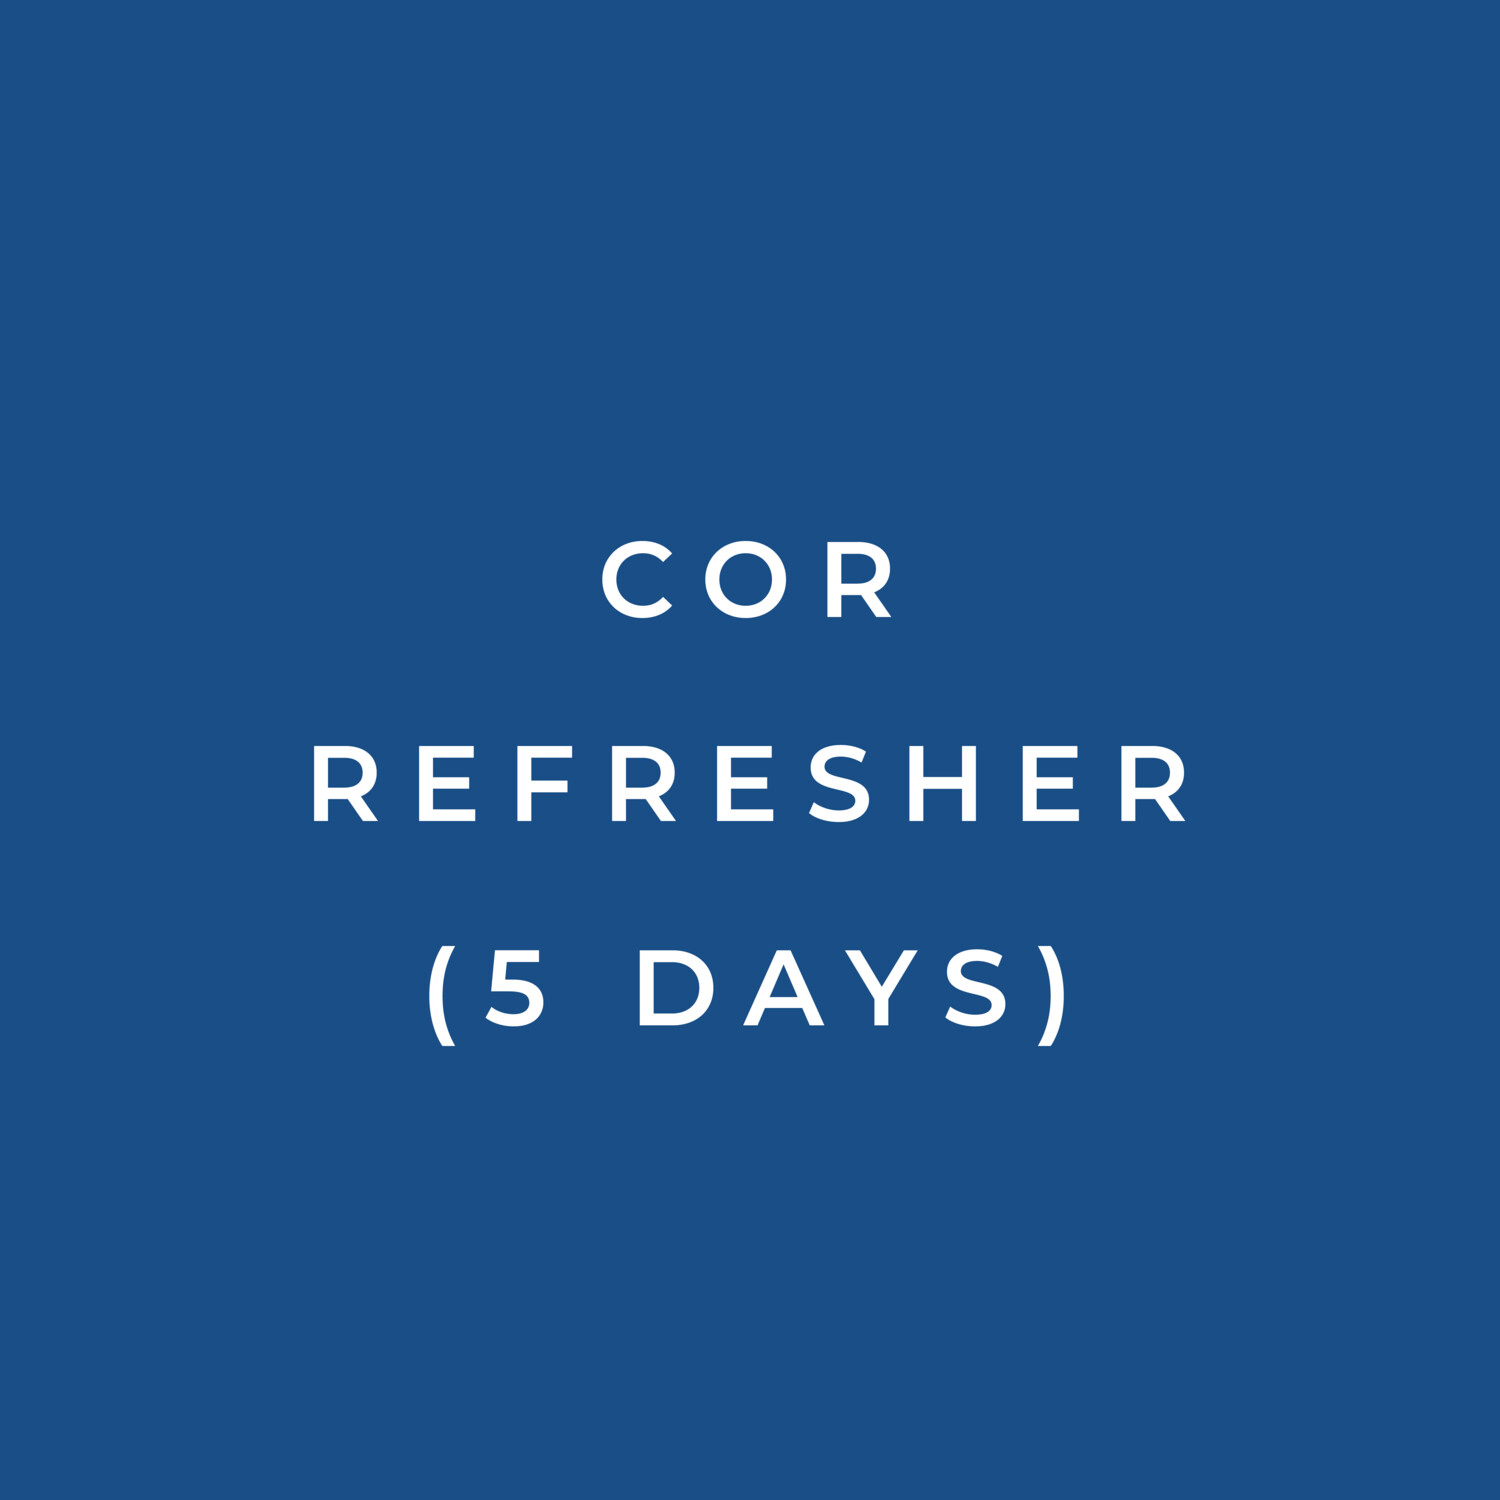 COR Refresher (5 Days): Contracting Officer Representative (COR) Refresher/Recertification